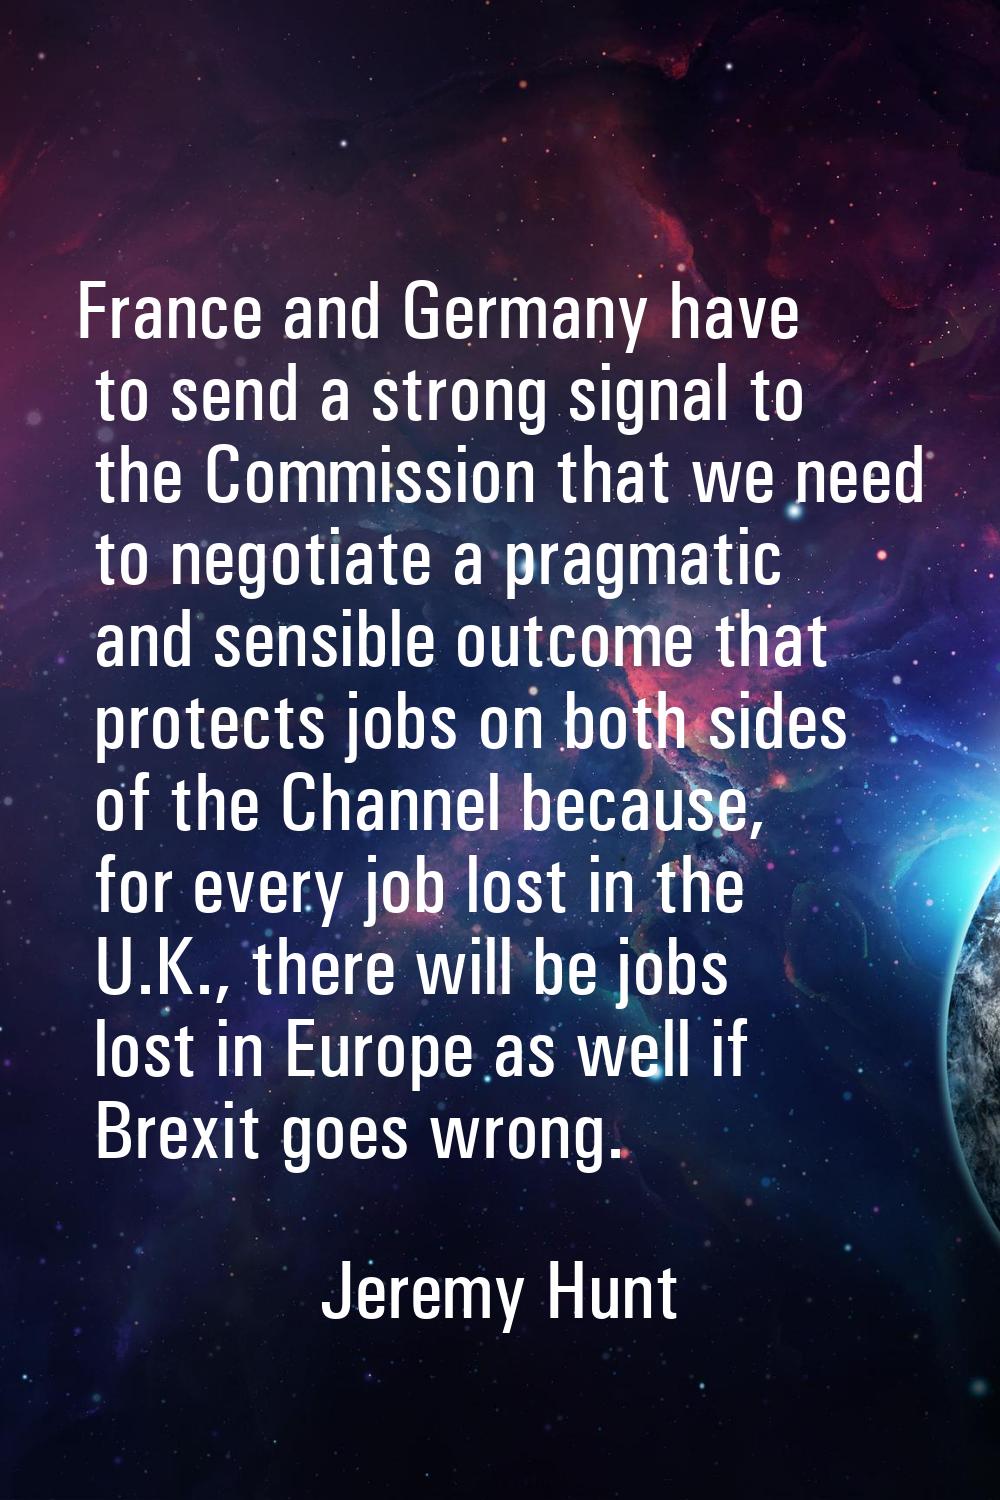 France and Germany have to send a strong signal to the Commission that we need to negotiate a pragm